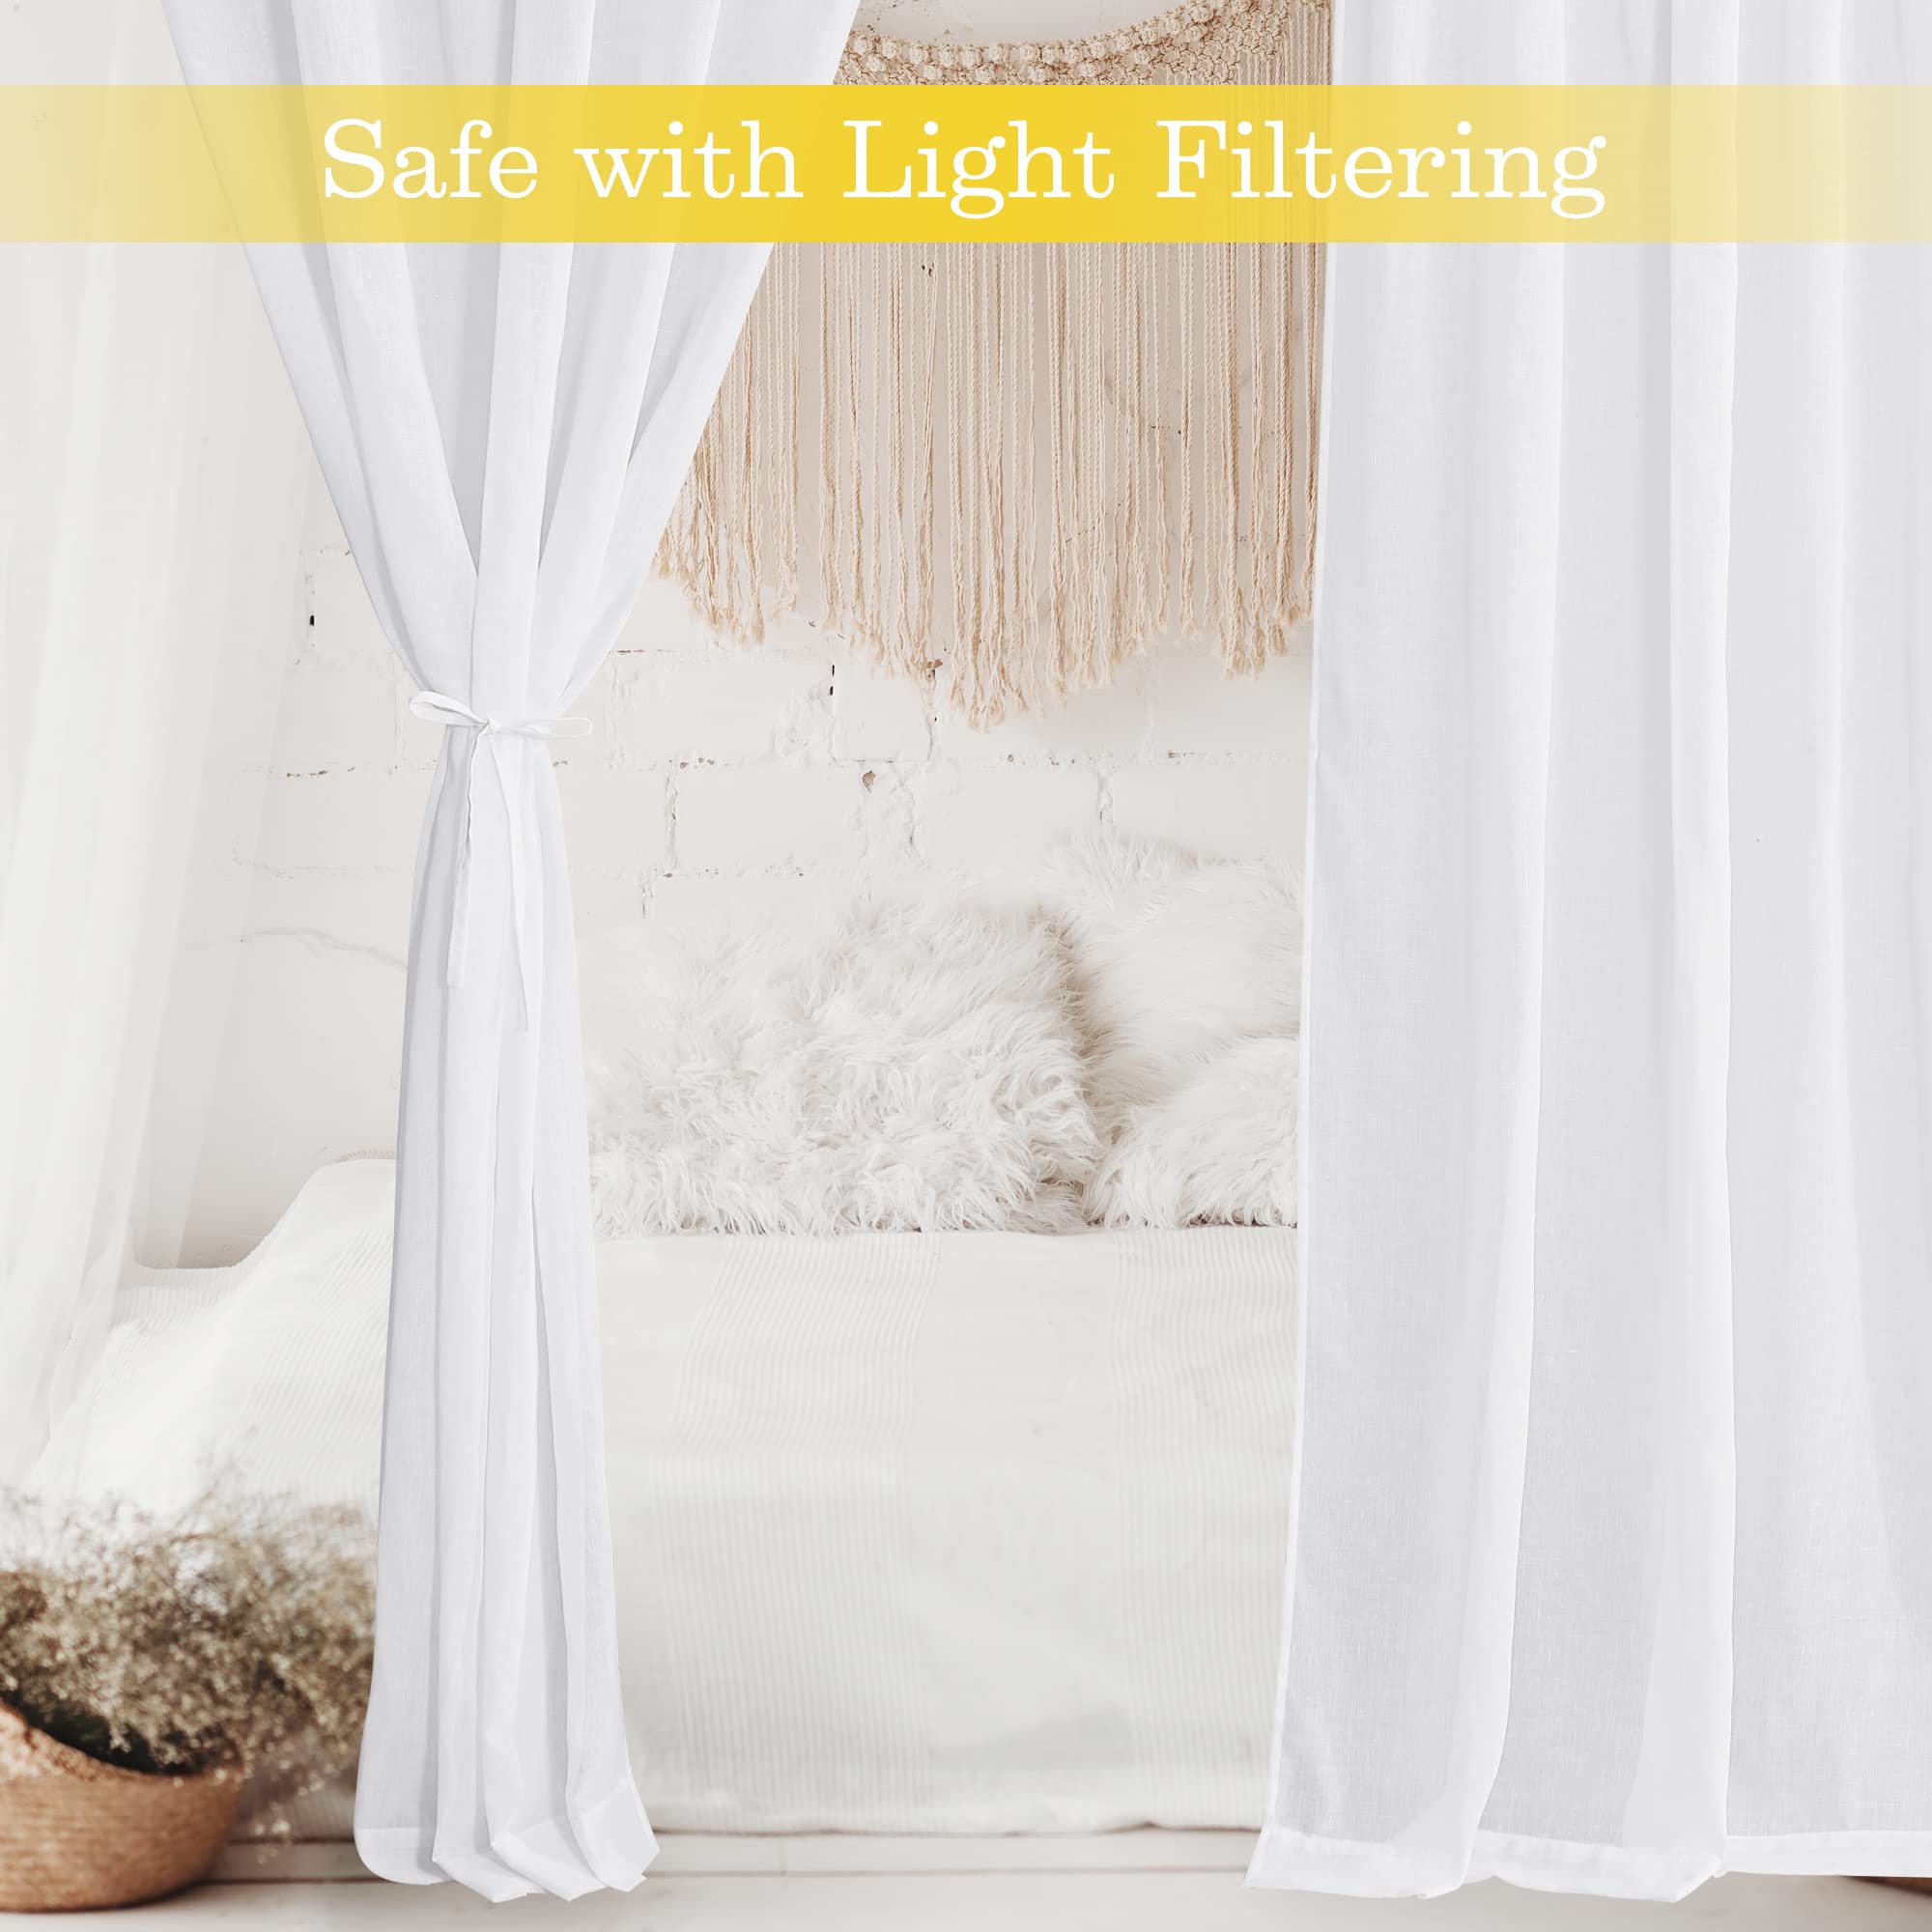 8PCS Canopy Bed Curtains , Faux Linen Blend Texture Bed Canopy Drapes Semi Sheer with Top Ties & Tie Backs for Bedroom